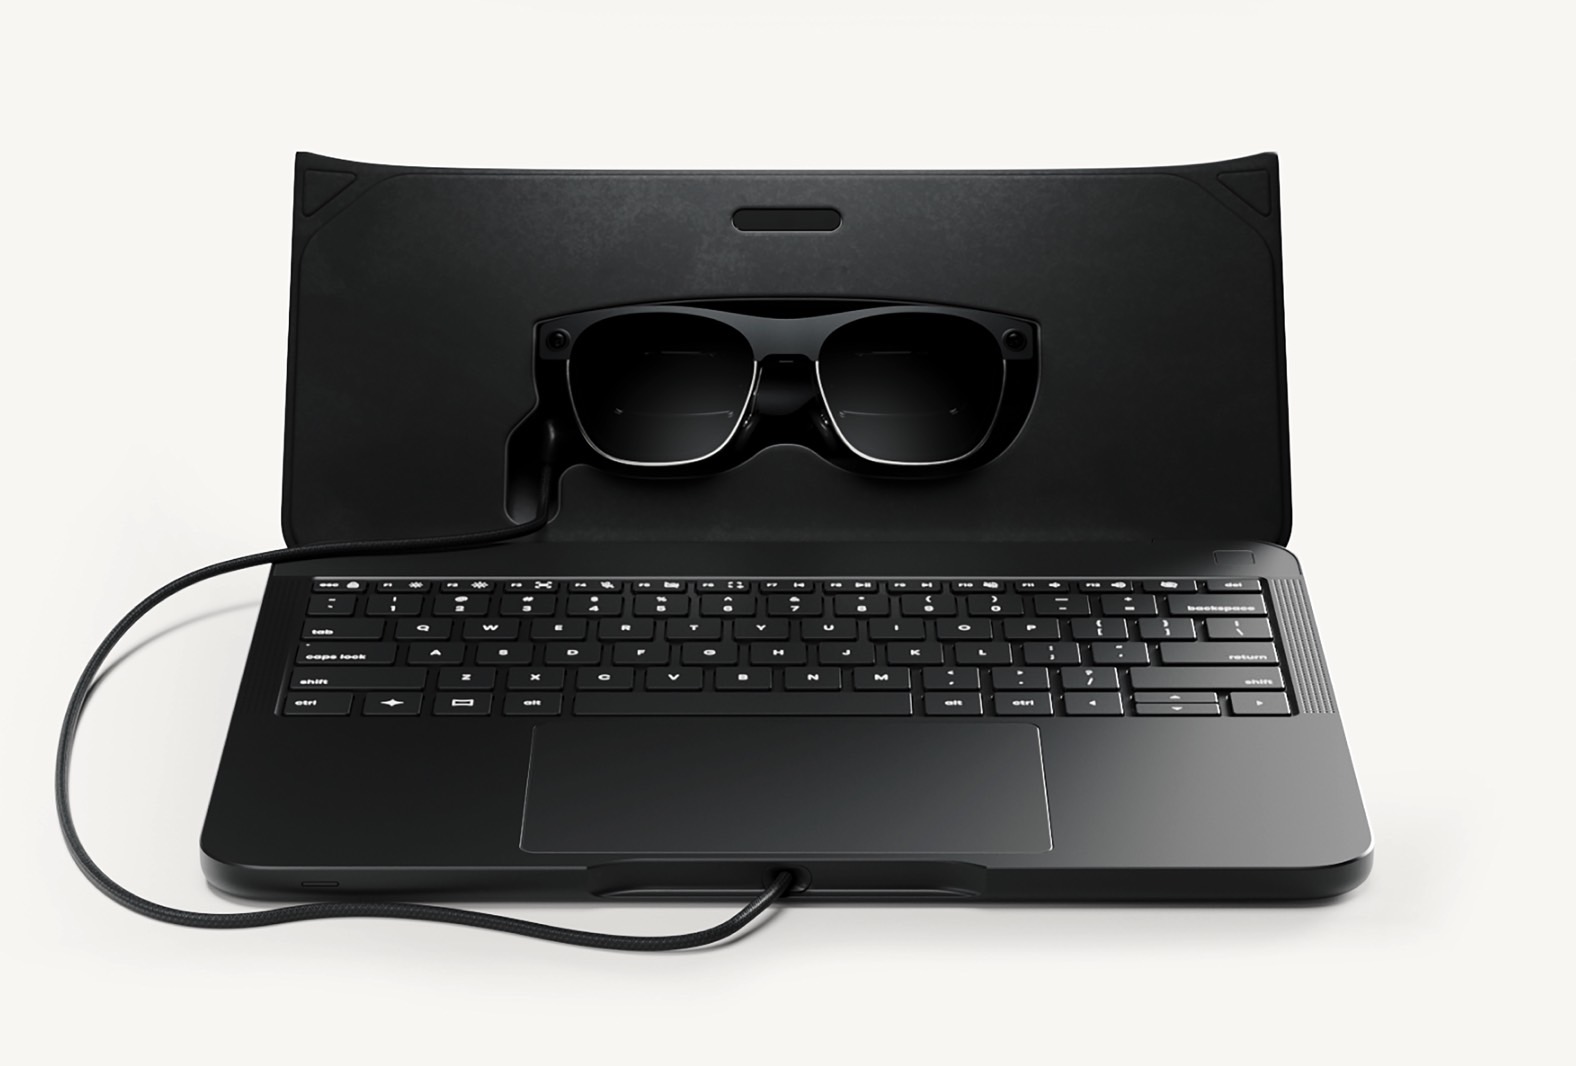 Spacetop G1 laptop comes with built-in AR glasses.